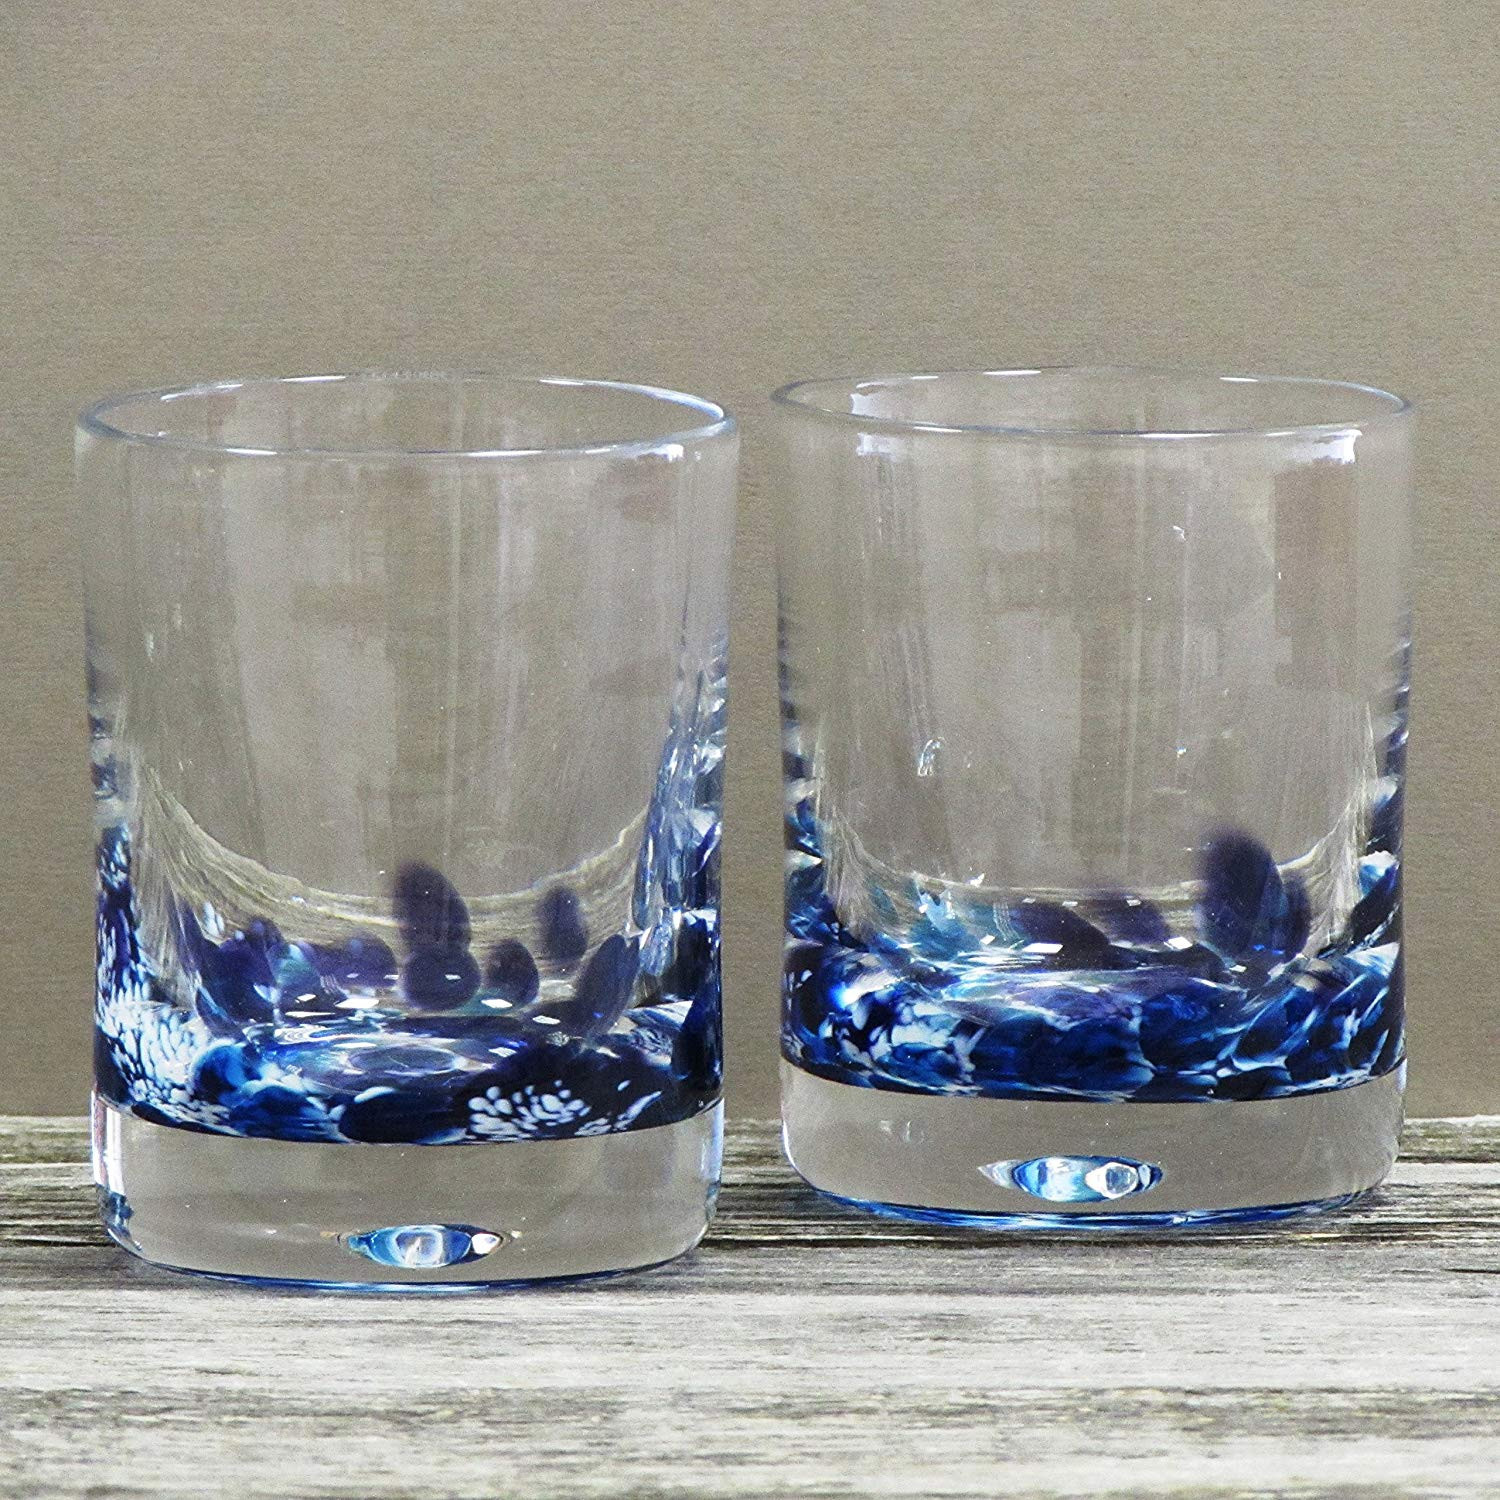 27 Lovable Marquis 11 Crystal Vase 2024 free download marquis 11 crystal vase of amazon com irish handmade whiskey scotch glasses by jerpoint within amazon com irish handmade whiskey scotch glasses by jerpoint glass studios ireland set of two h